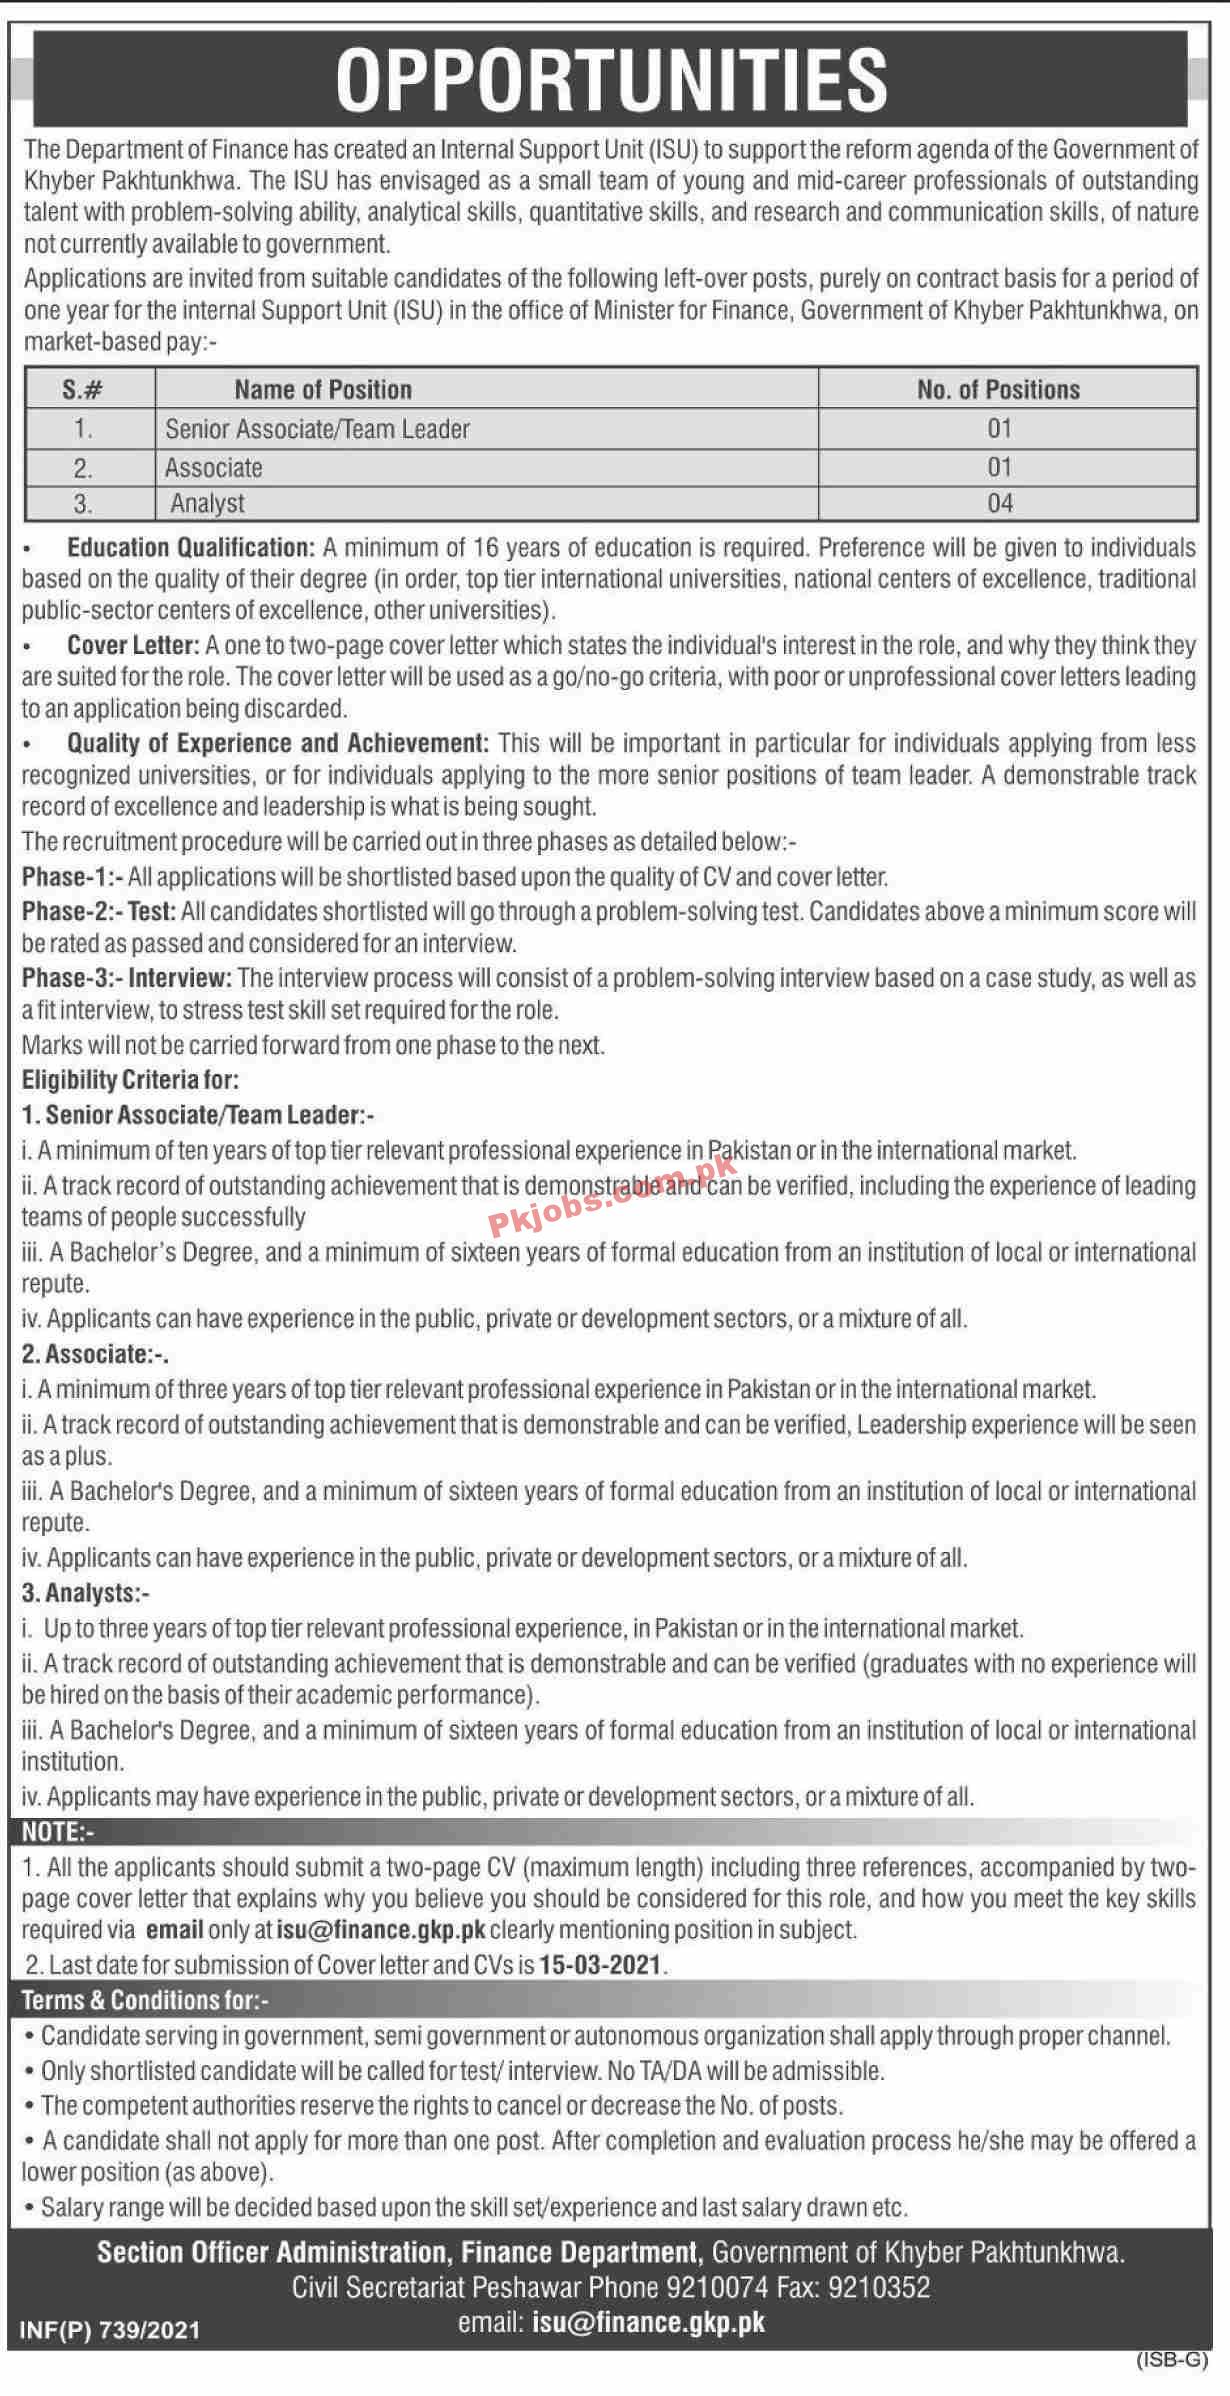 Jobs in The Department of Finance